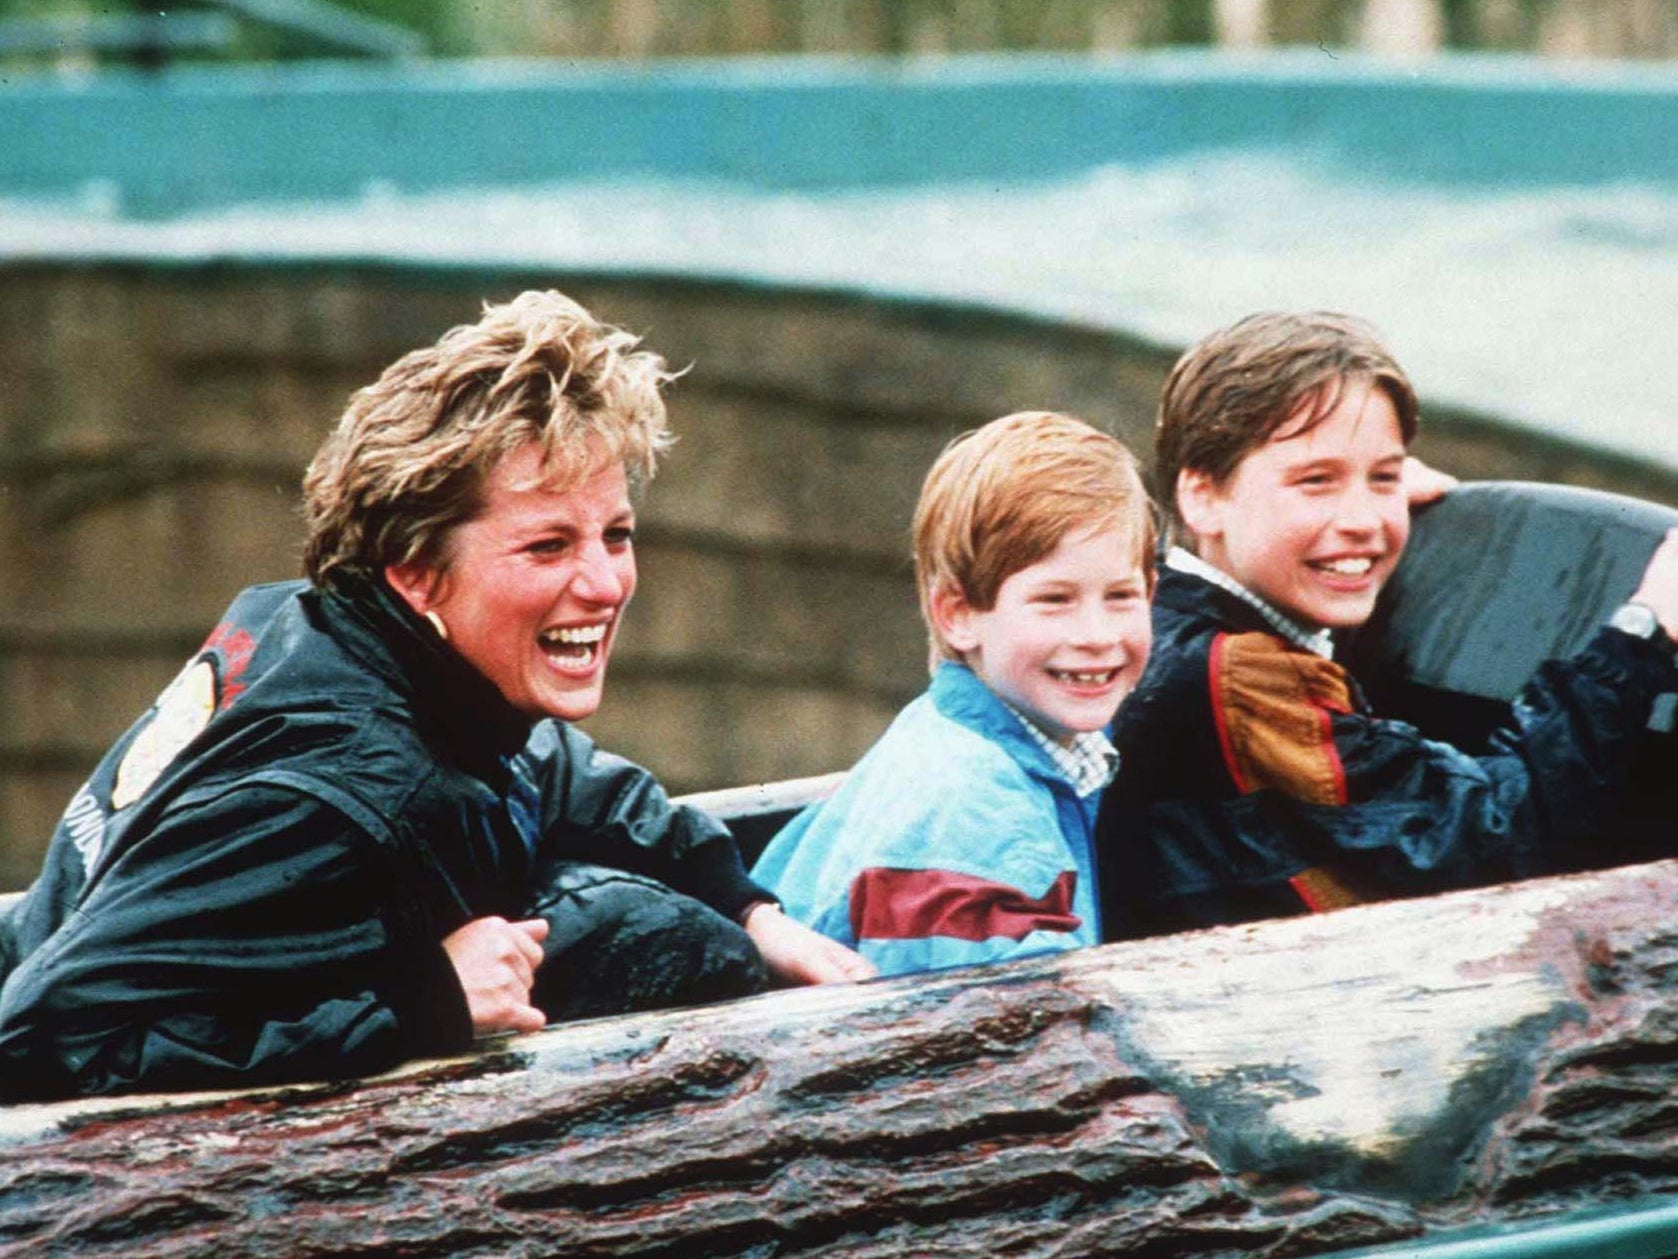 Princess Diana, Prince William and Prince Harry at Thorpe Park in 1993